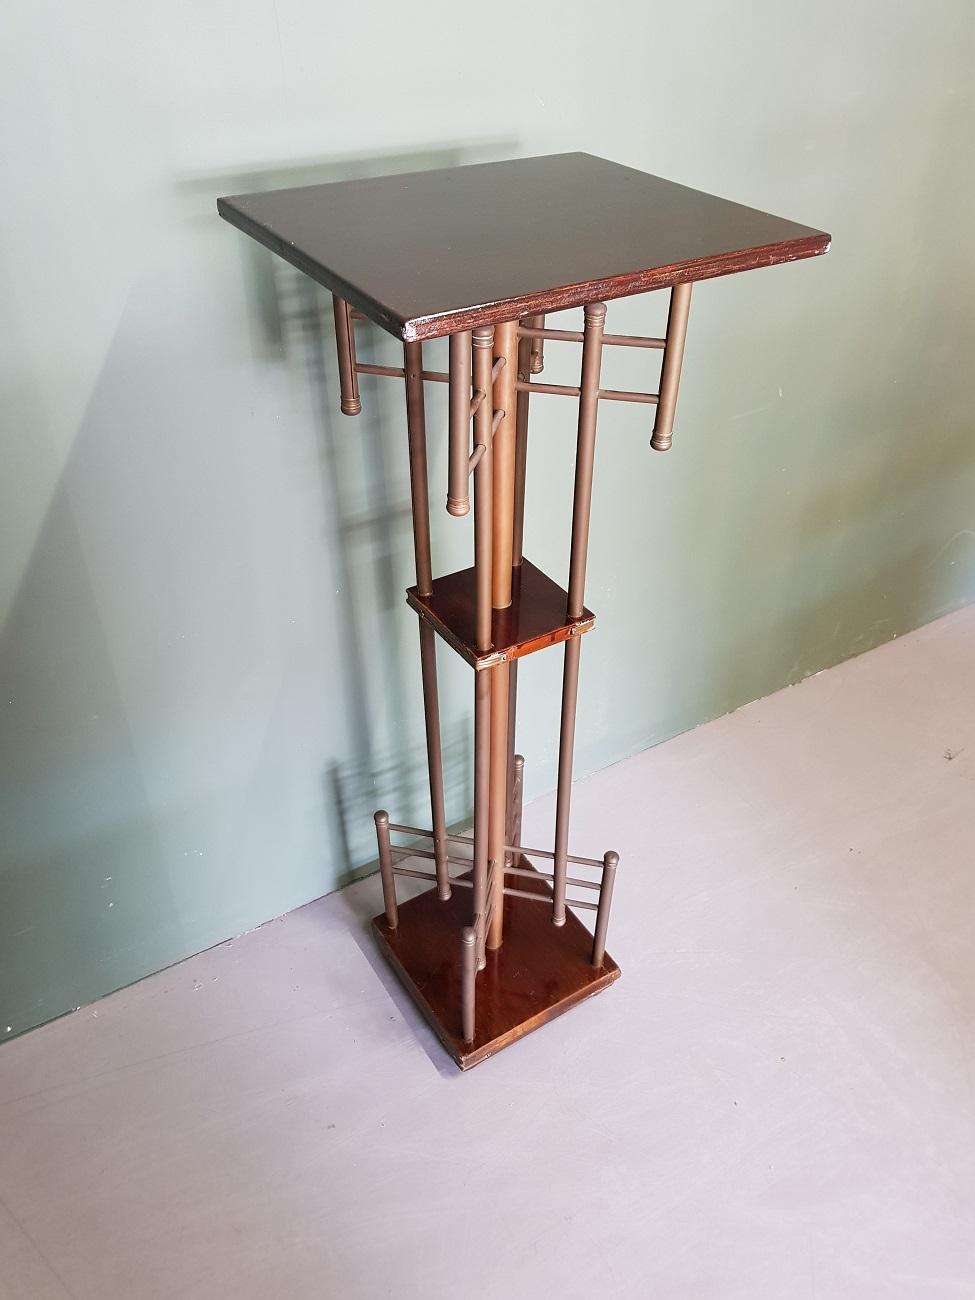 Art Deco plant table or pedestal made of brass tubes and wooden between trays, made in the 1930s.

The measurements are:
Depth 32 cm/ 12.5 inch.
width 36 cm/ 14.1 inch.
Height 99 cm/ 38.9 inch.